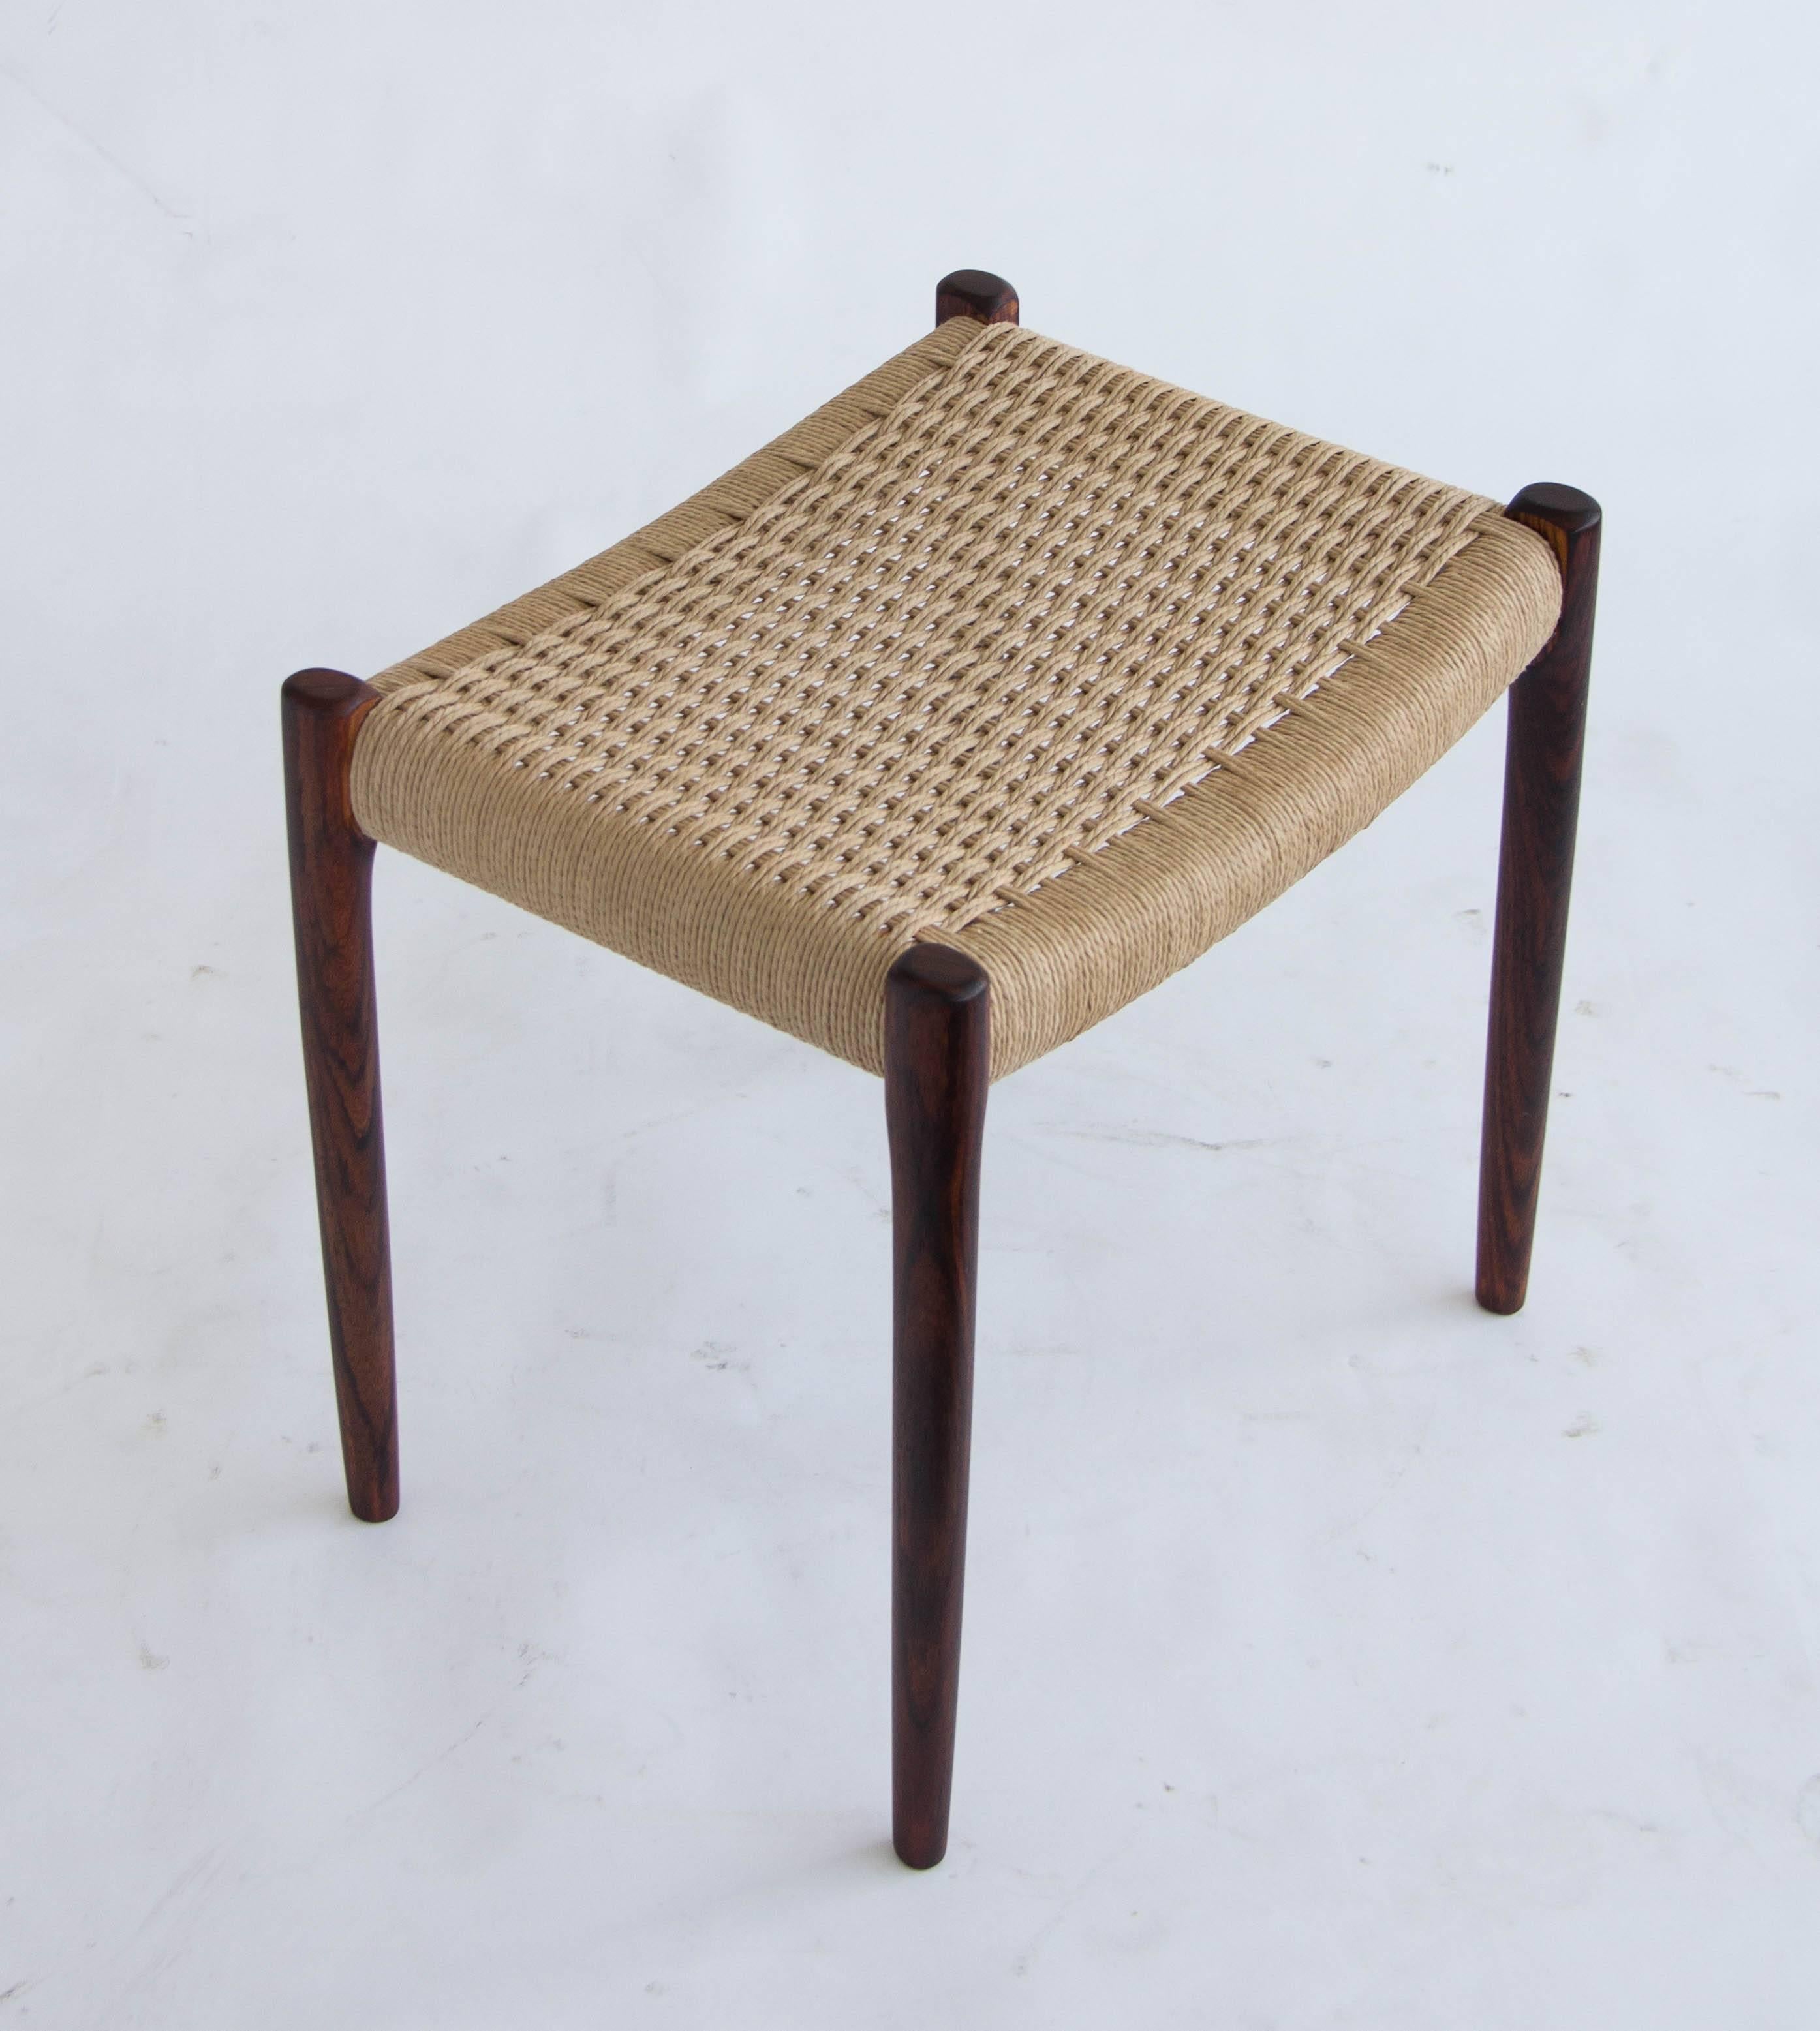 Model 80A Ottoman by Niels Møller.

Simple rosewood ottoman or footrest with Danish cord upholstery and slightly tapered legs, designed by Niels Møller for JL Møllers Møbelfabrik of Denmark. The cord, made of twisted paper is woven out of one